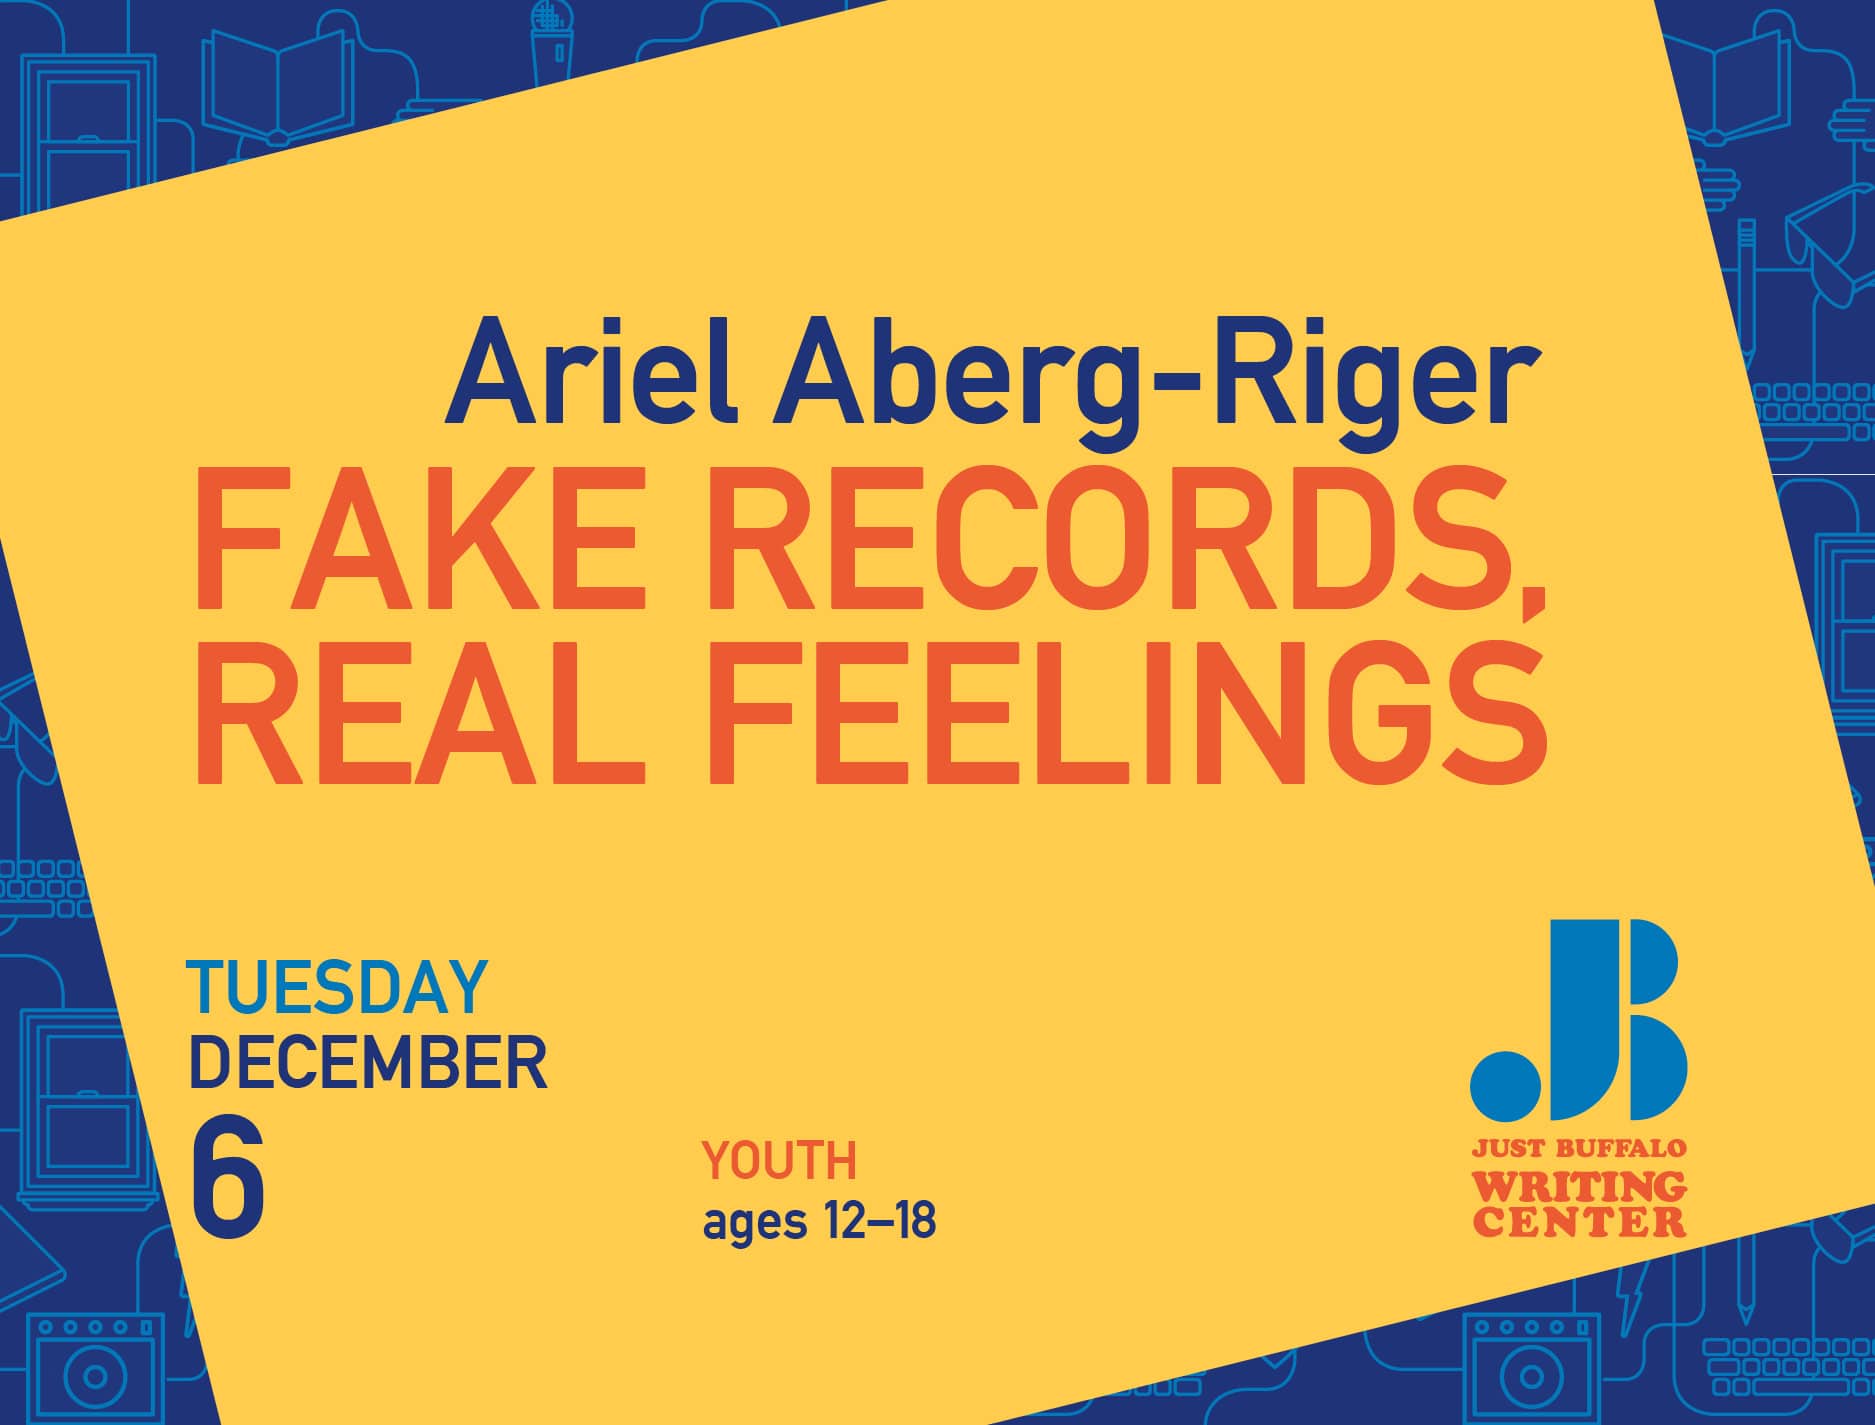 Fake Records, Real Feelings with Ariel Aberg-Riger